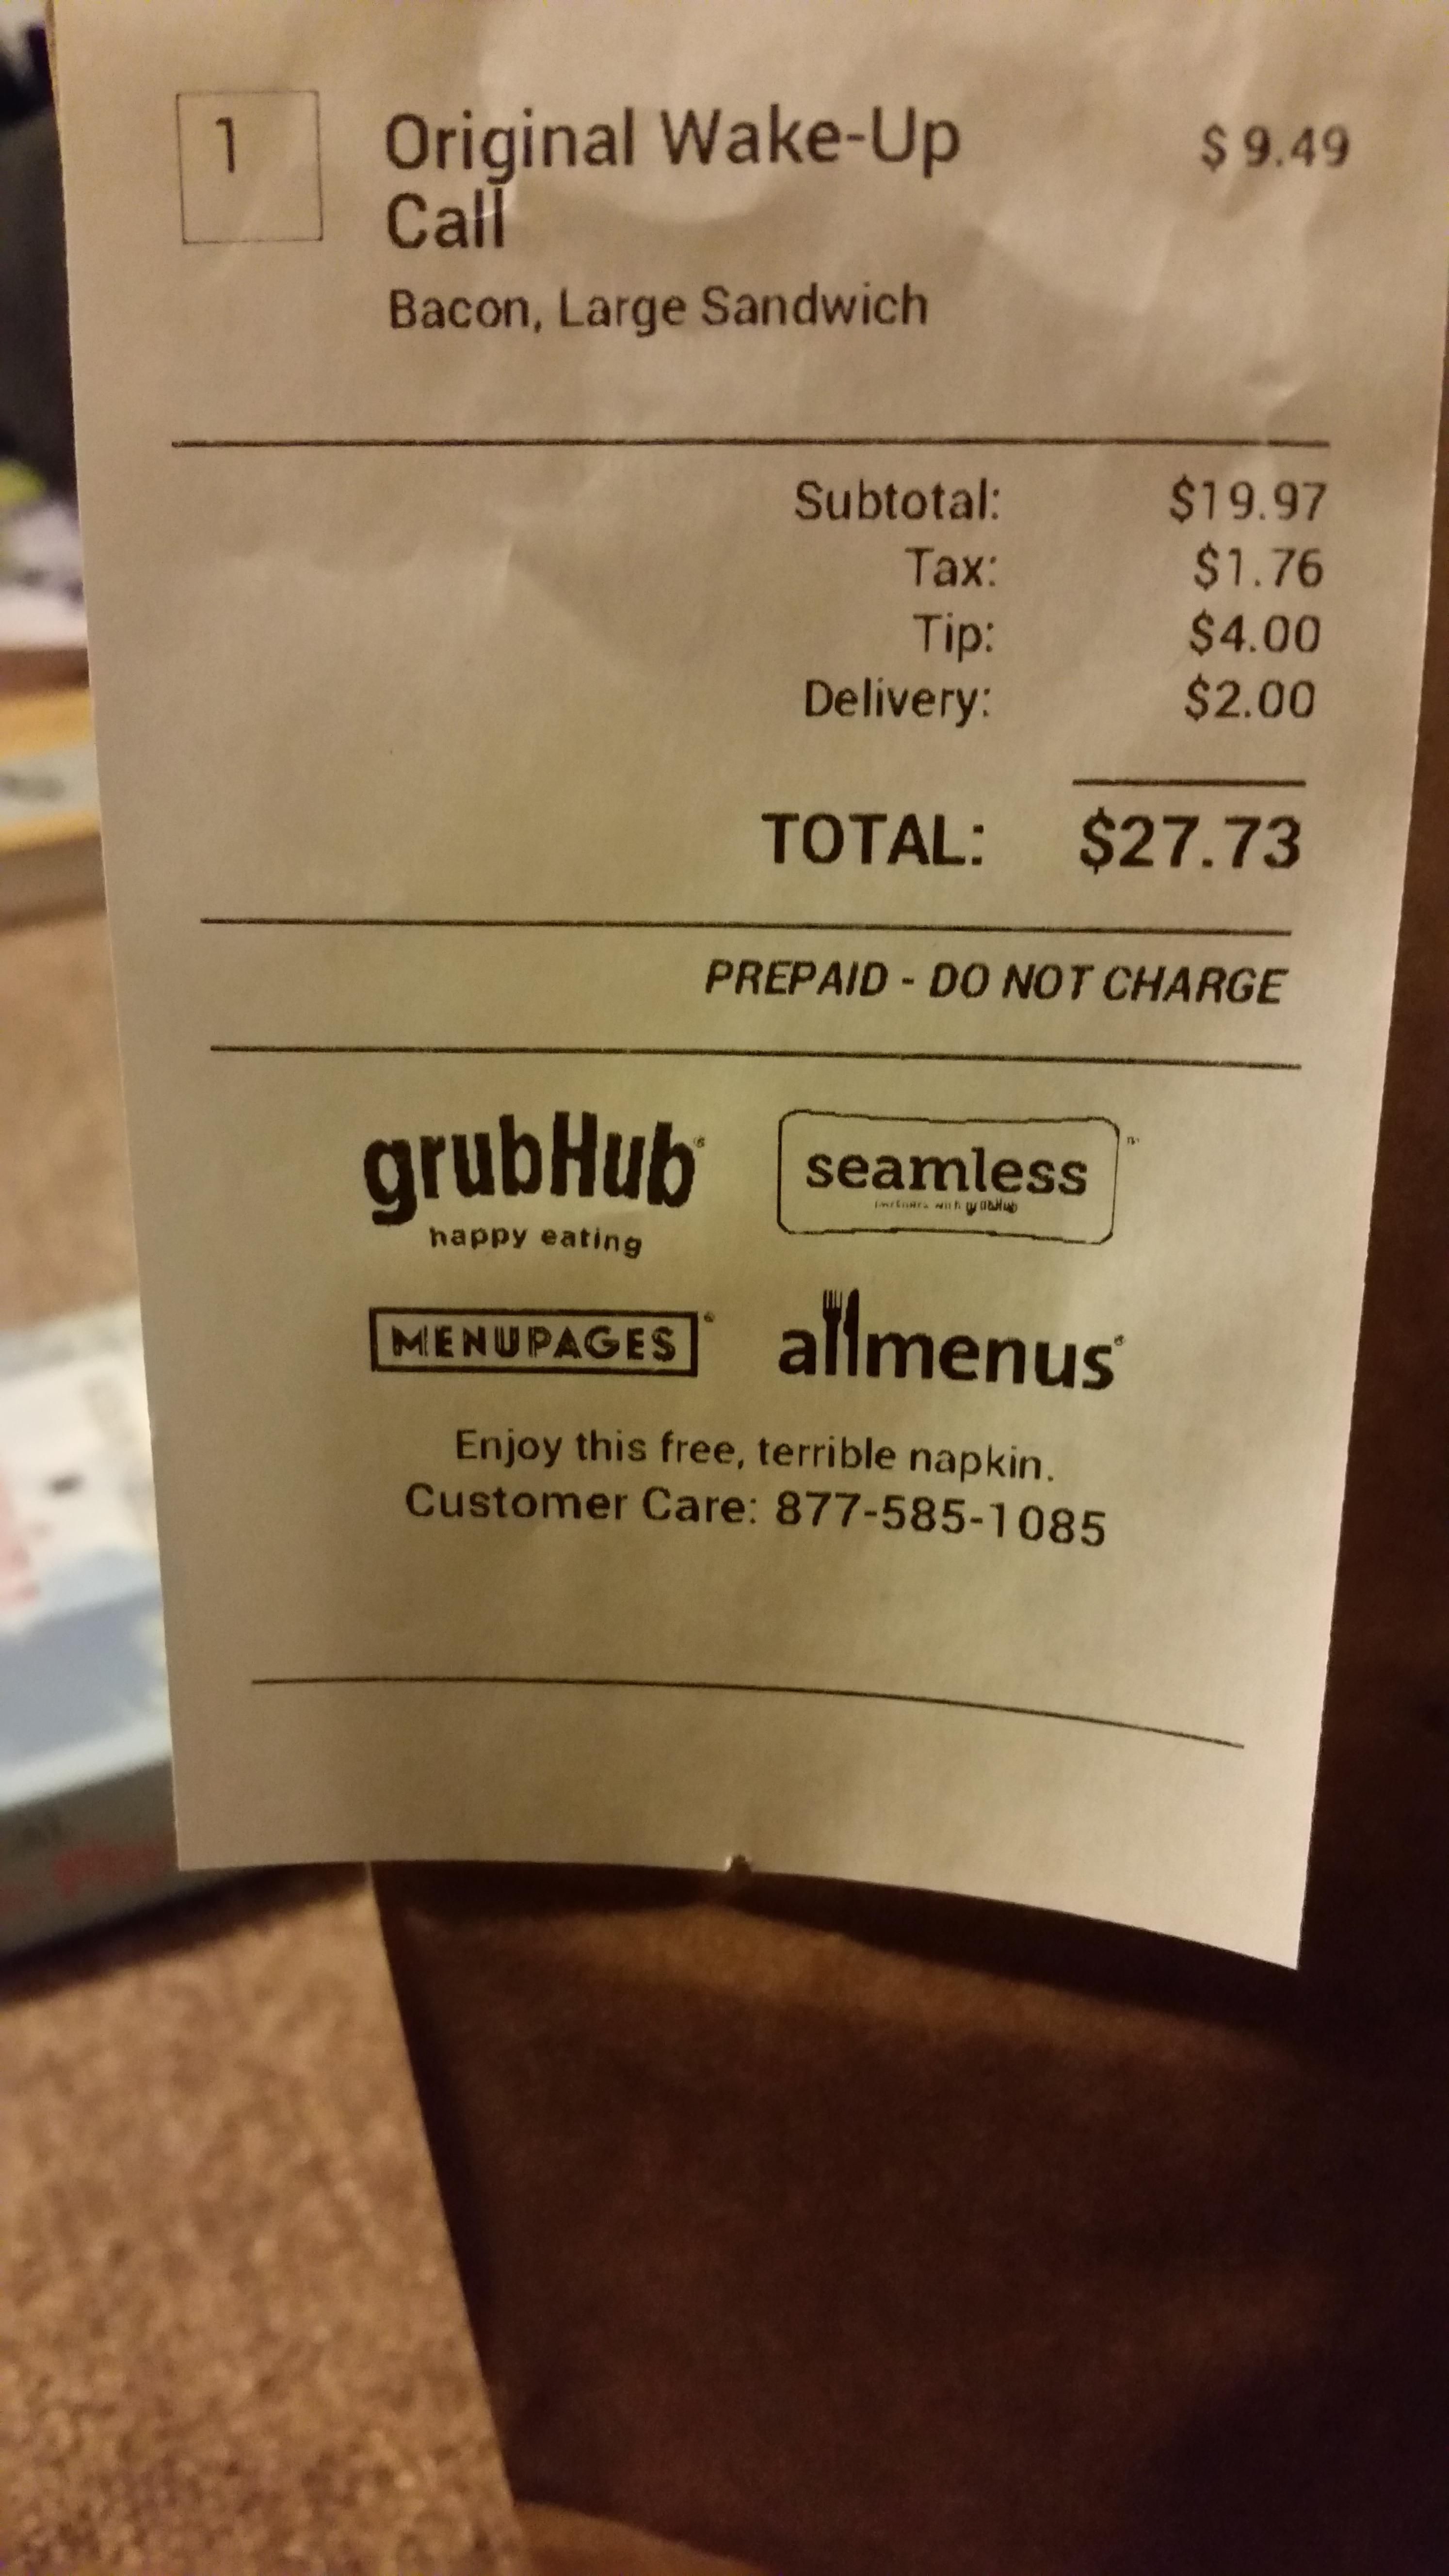 My reciept is a free, terrible napkin